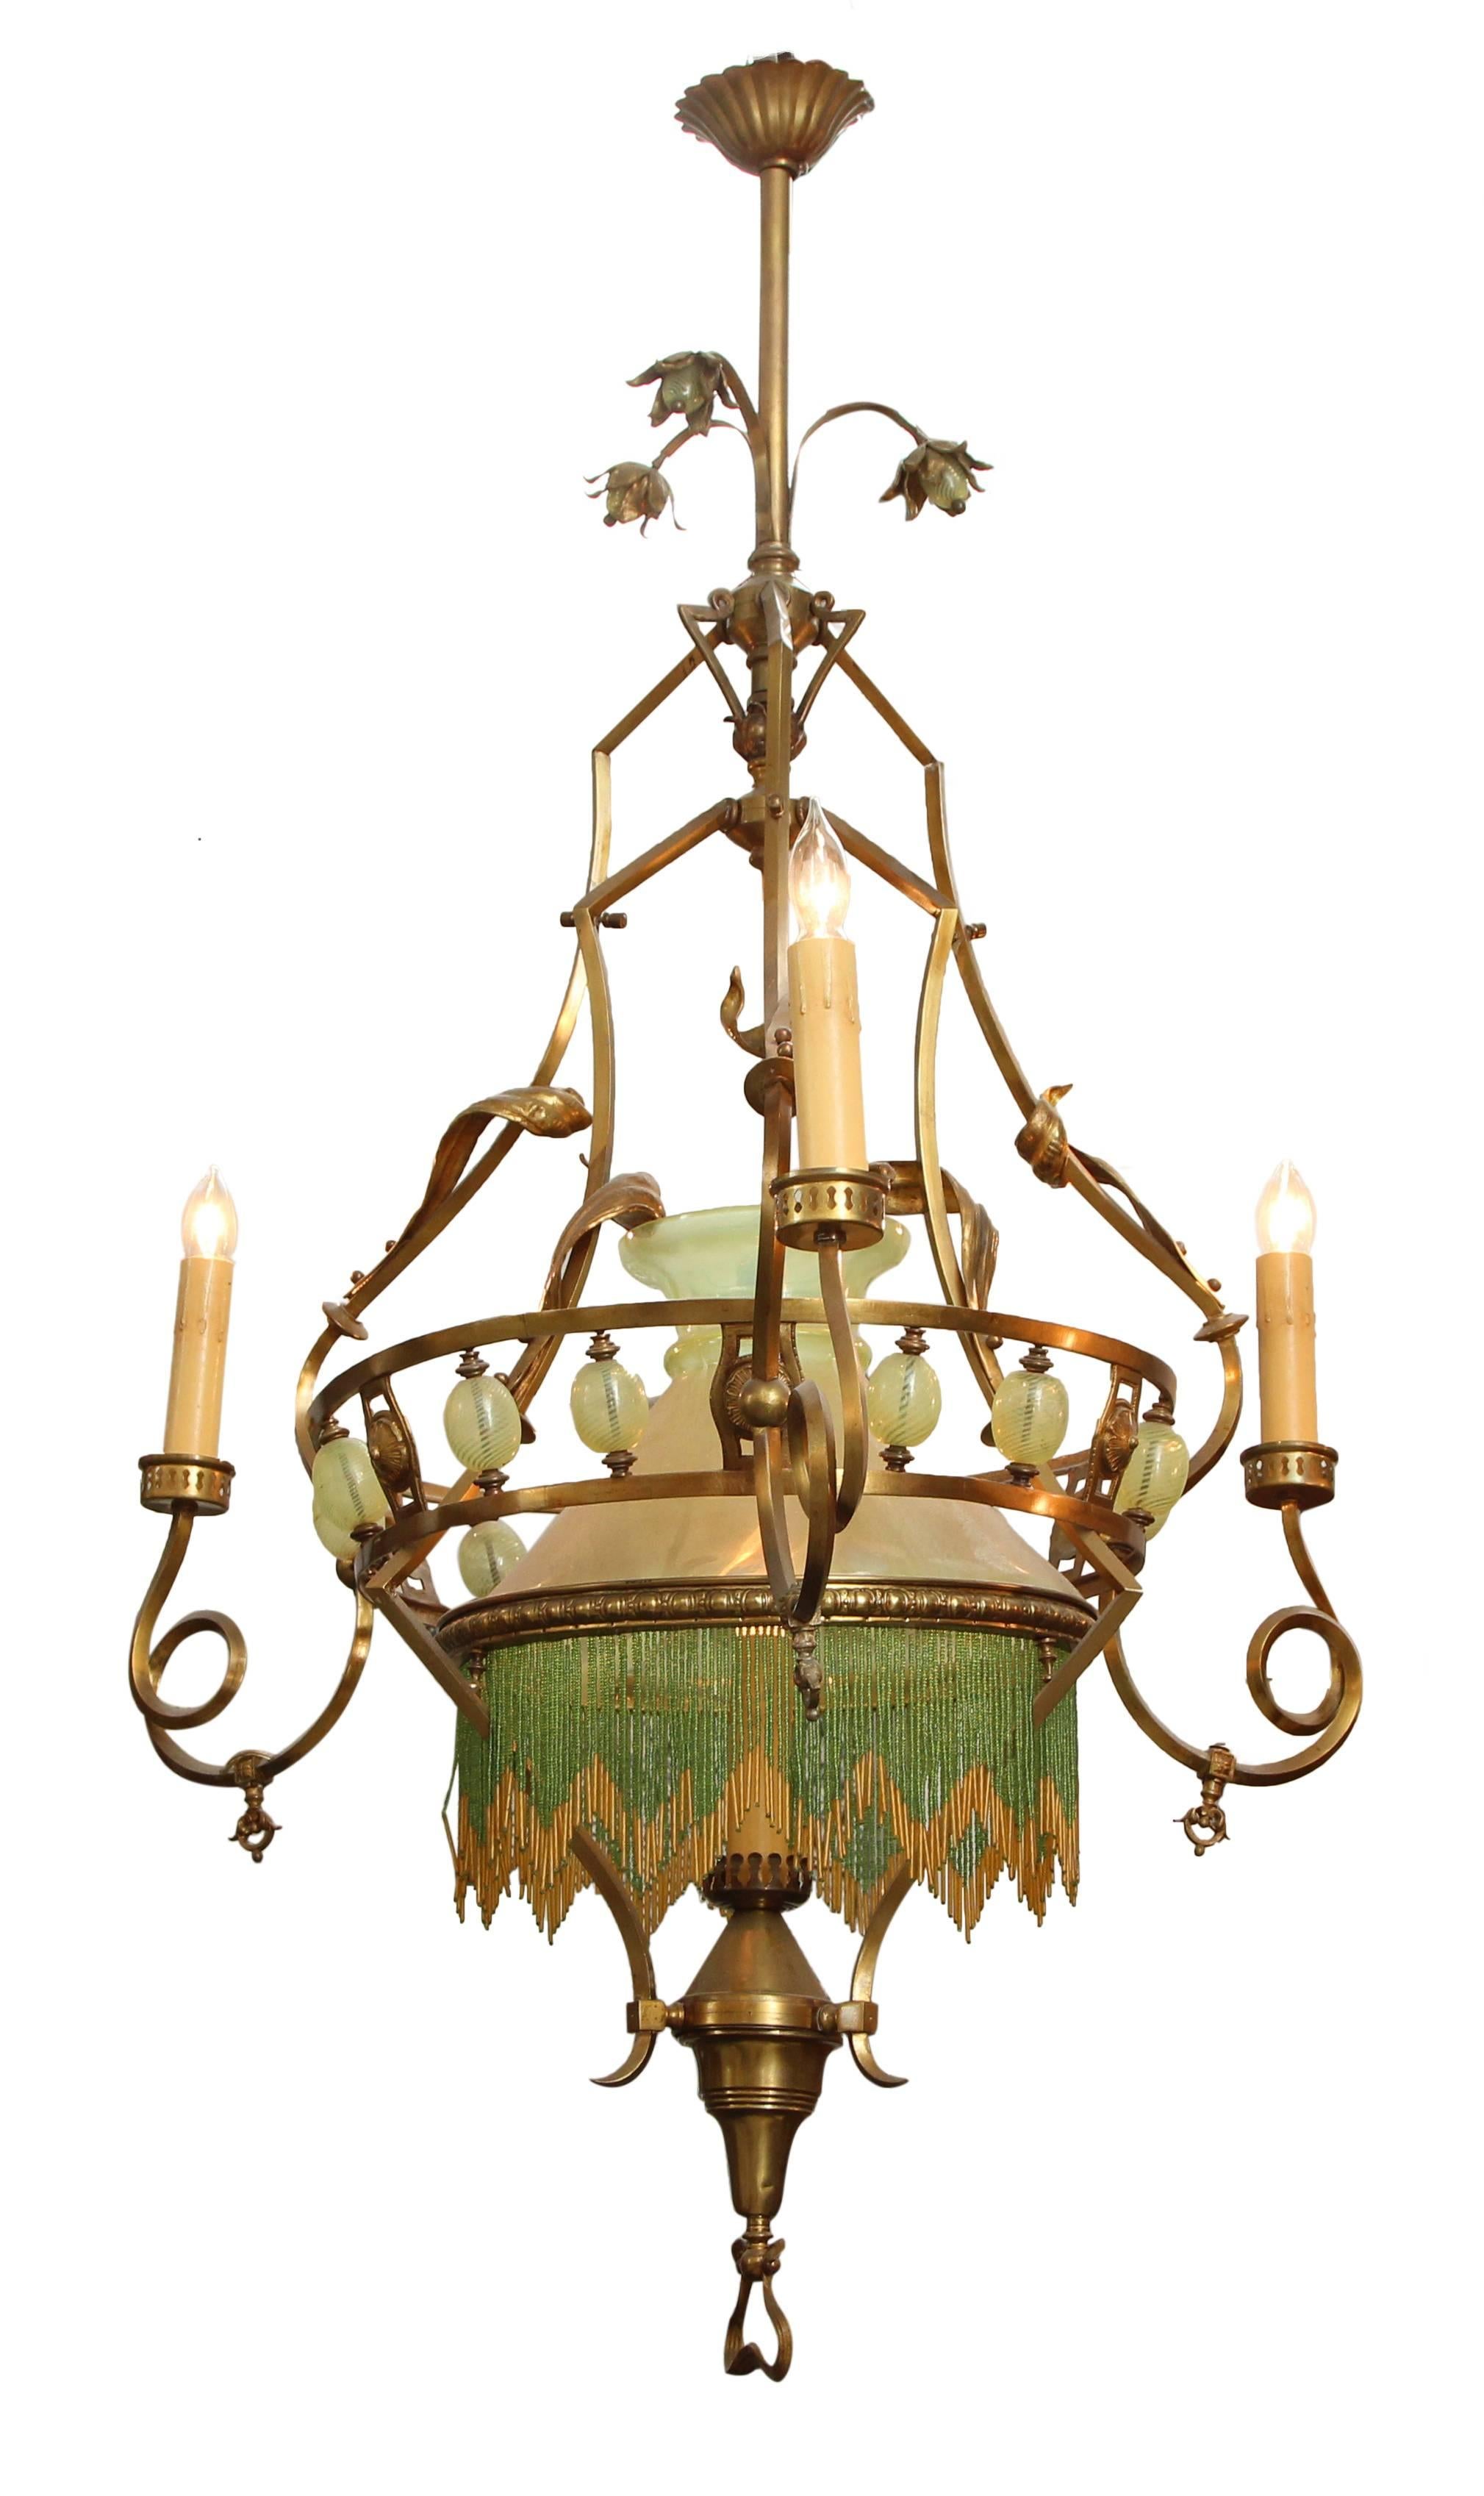 Formerly oil or gas, completely restored and rewired 19th century Art Nouveau chandelier. This can be seen at our 5 East 16th St. store at Union Square in Manhattan.